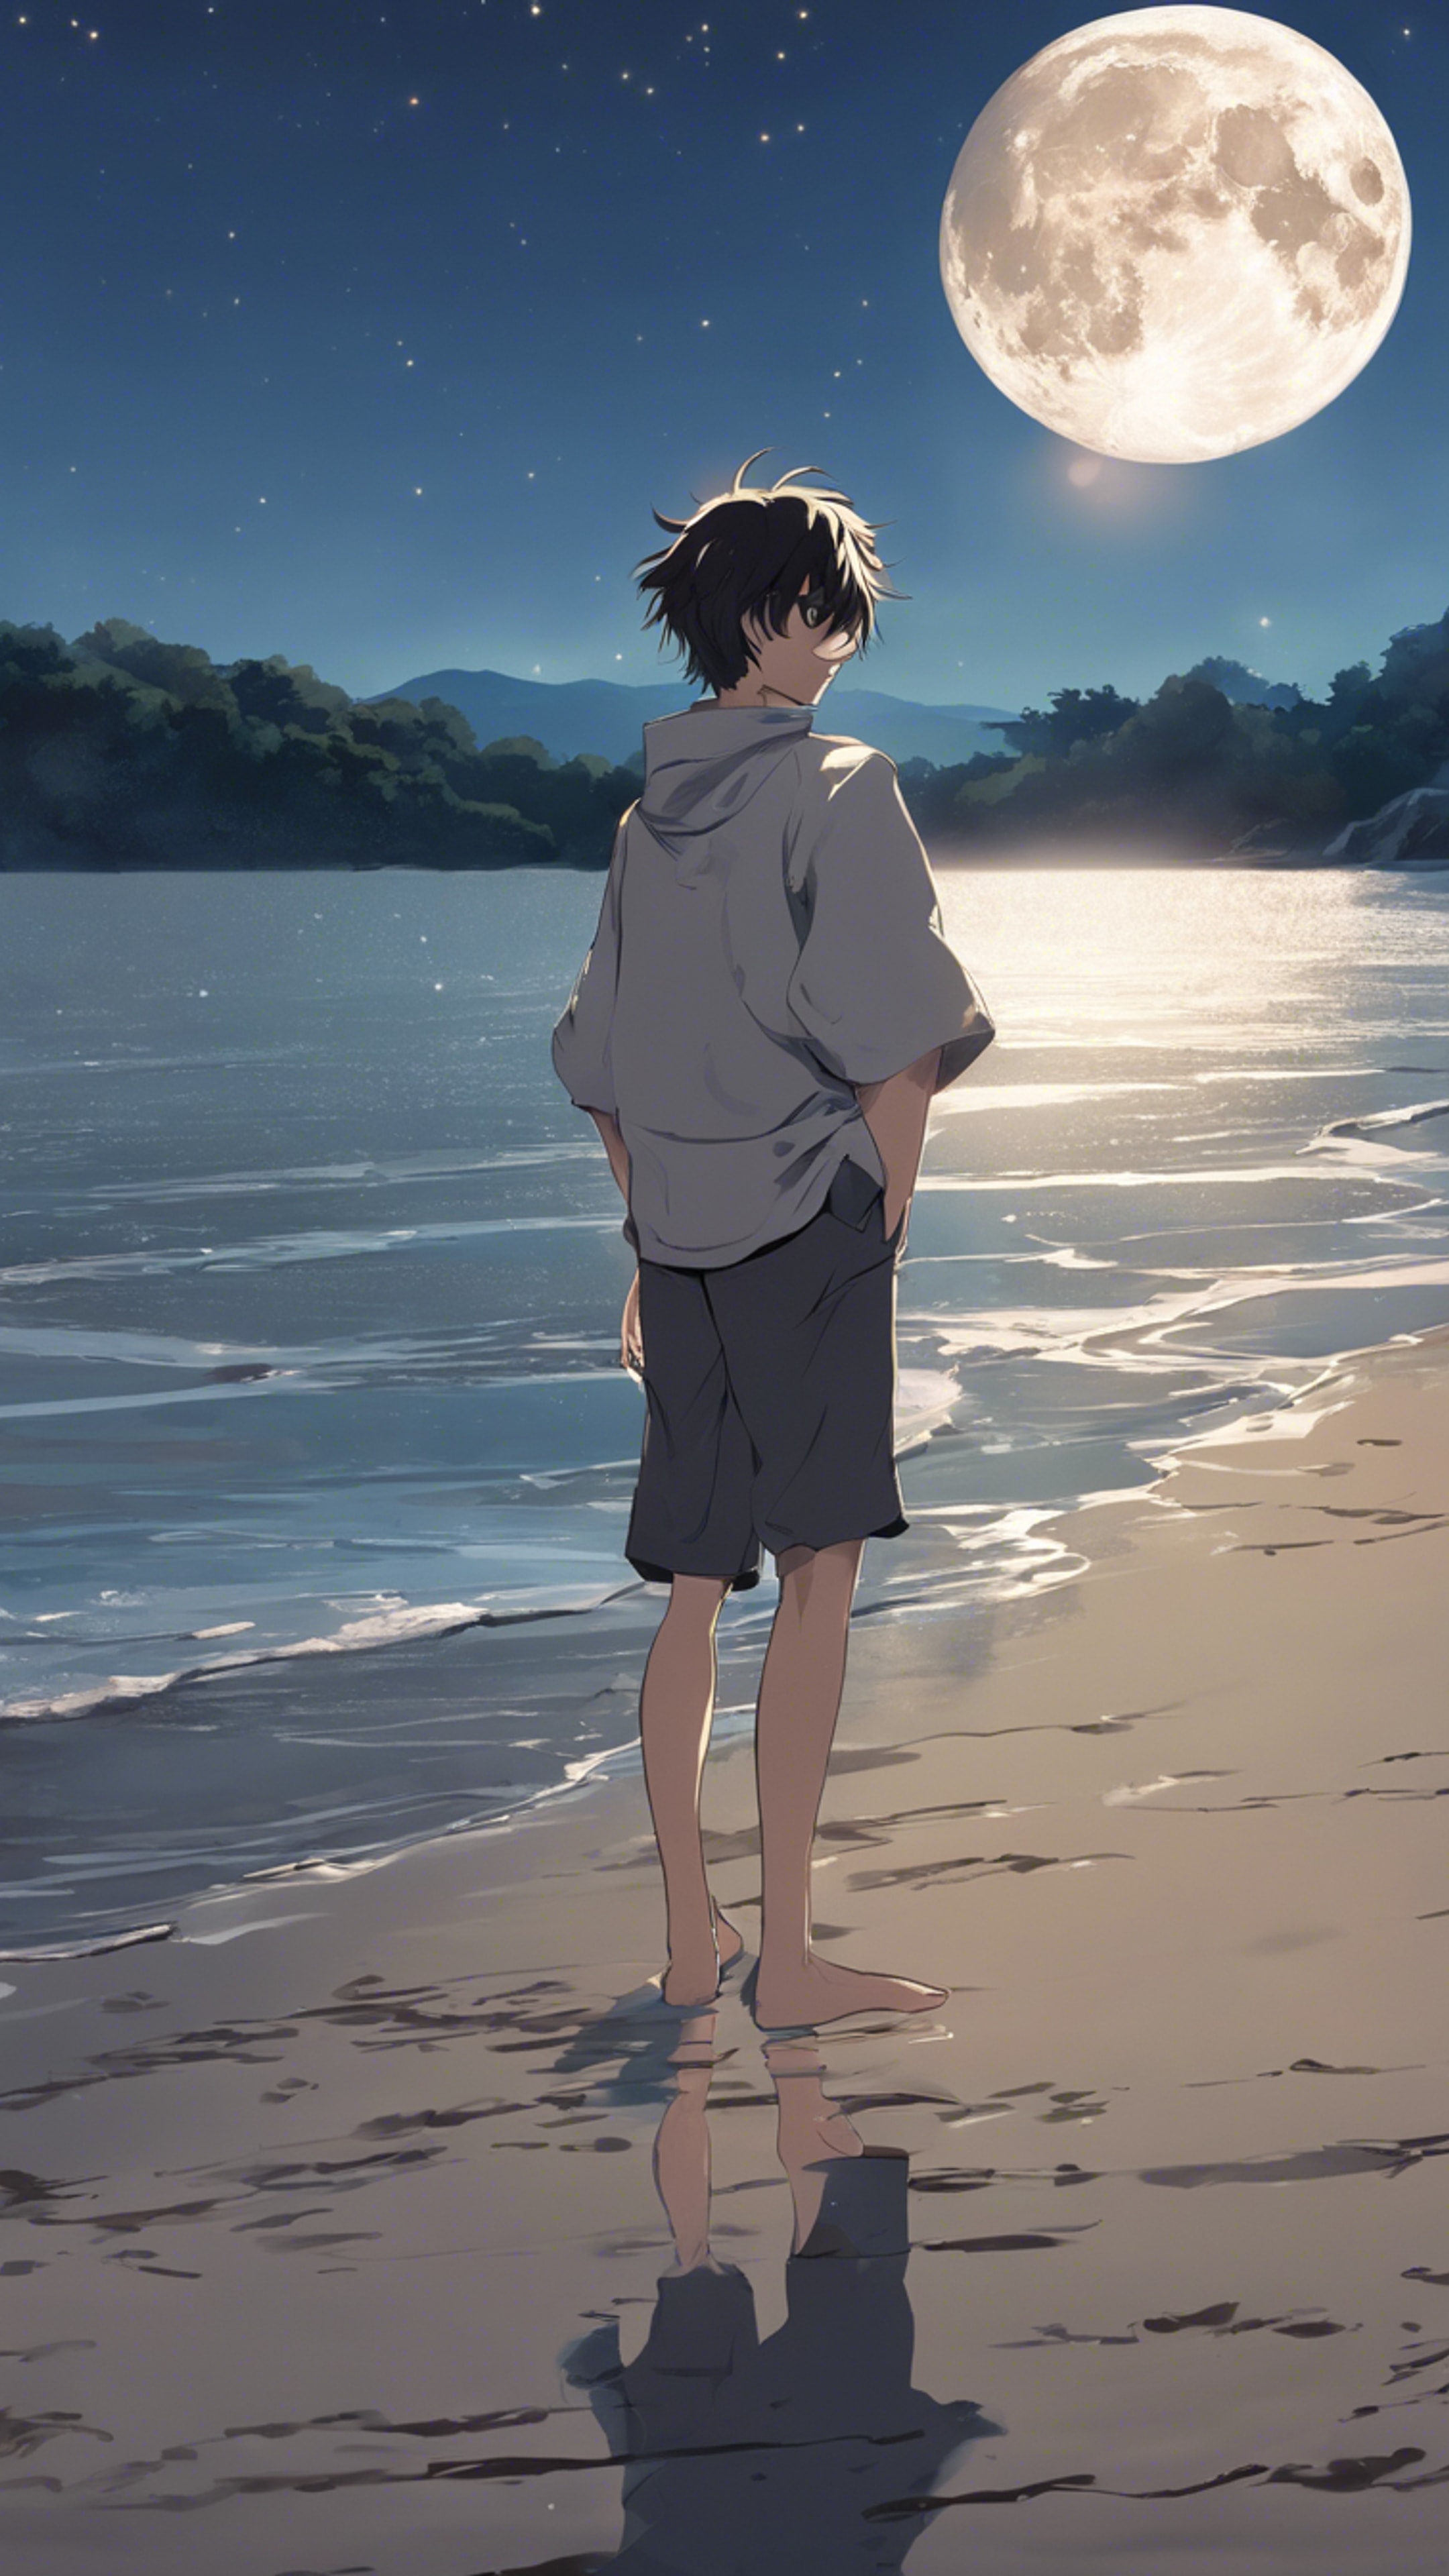 An anime boy standing barefoot on the shore, with the moon reflecting in upturned, joyous eyes. Fondo de pantalla[a80f9c3e465041ad9759]